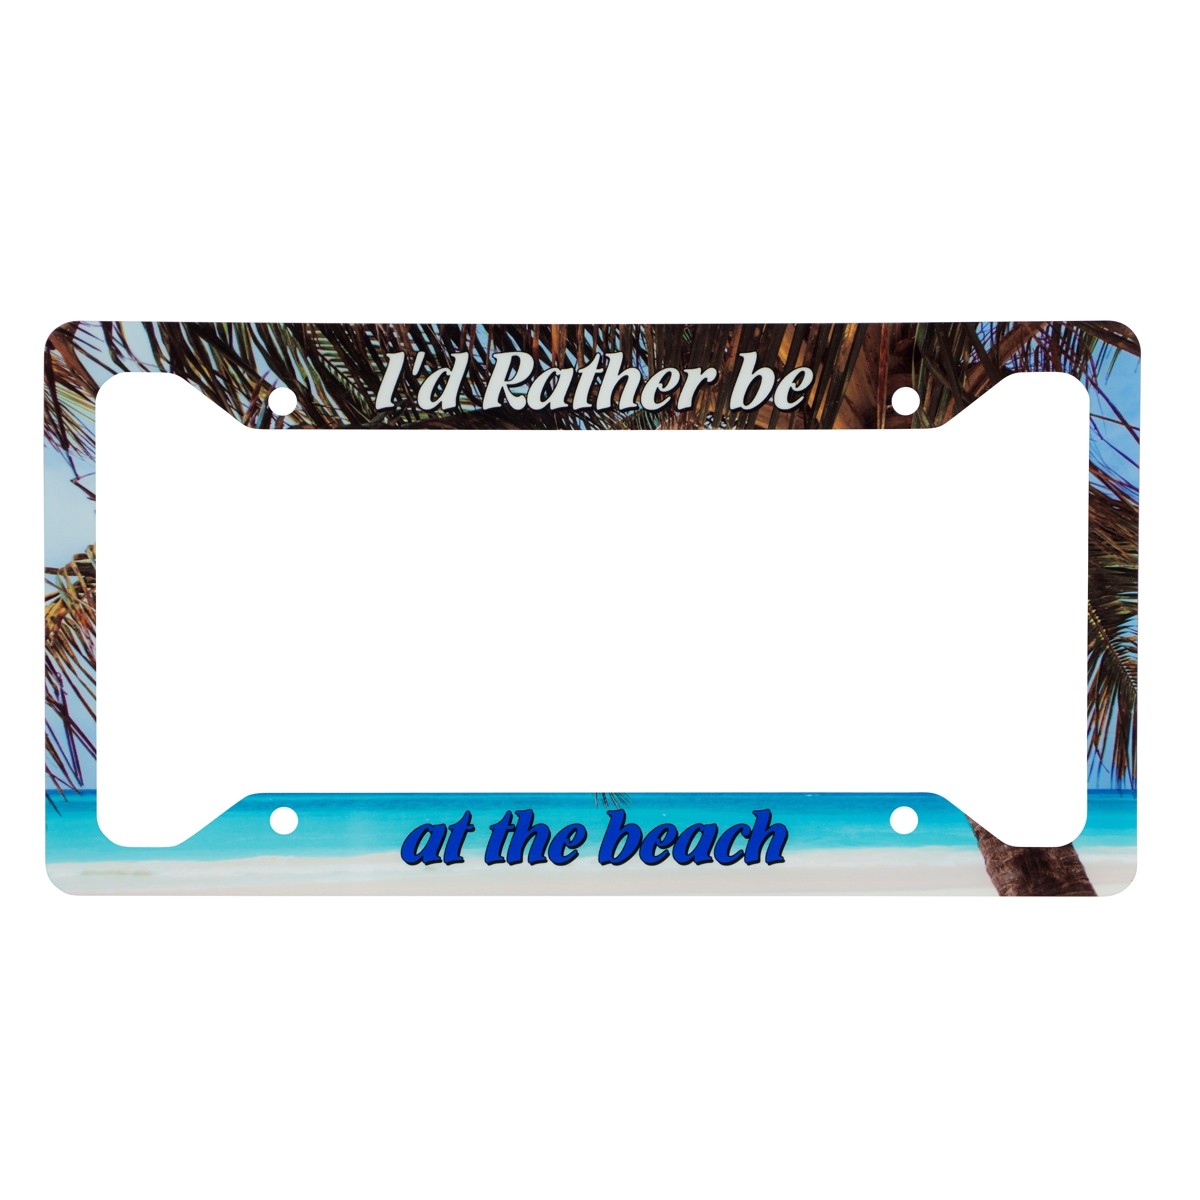 luckmx Product Express Personalized Your Own License Plate Frame Metal  Lilly Pulitzer Let's Cha Cha Tutorial- Buy Online in India at  desertcart.in. ProductId : 154286710.